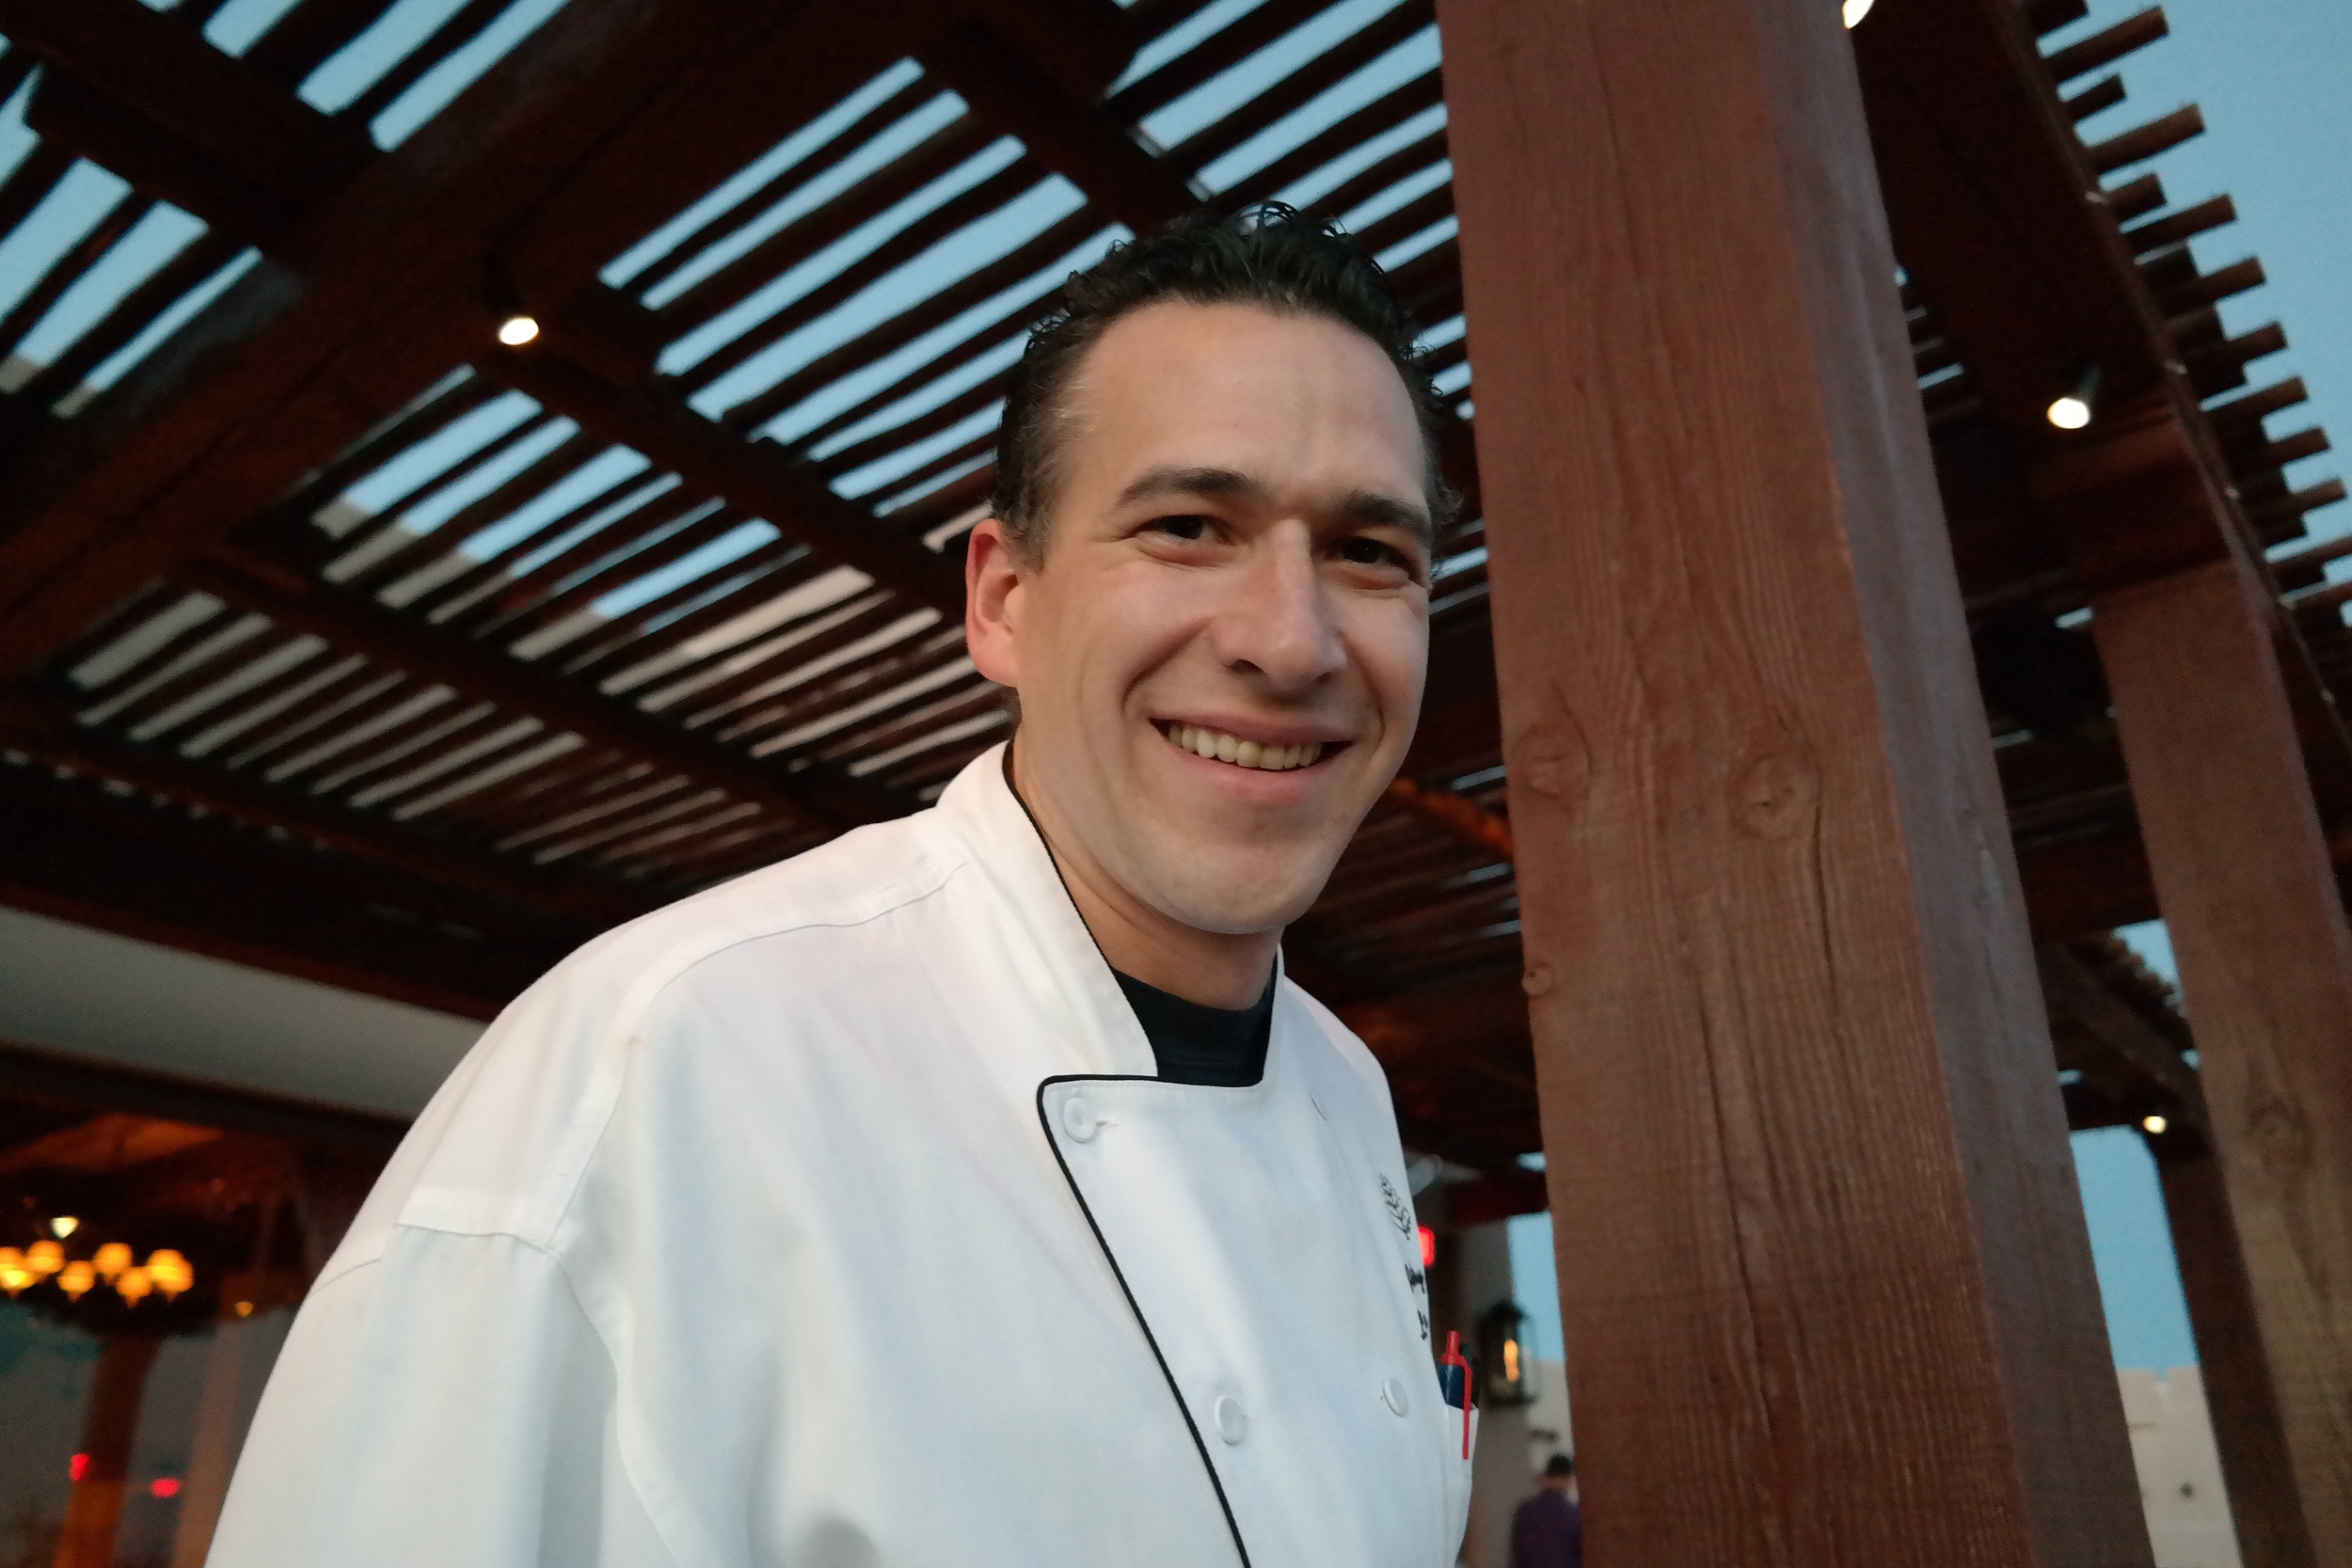 Pastry Chef Lance Whipple